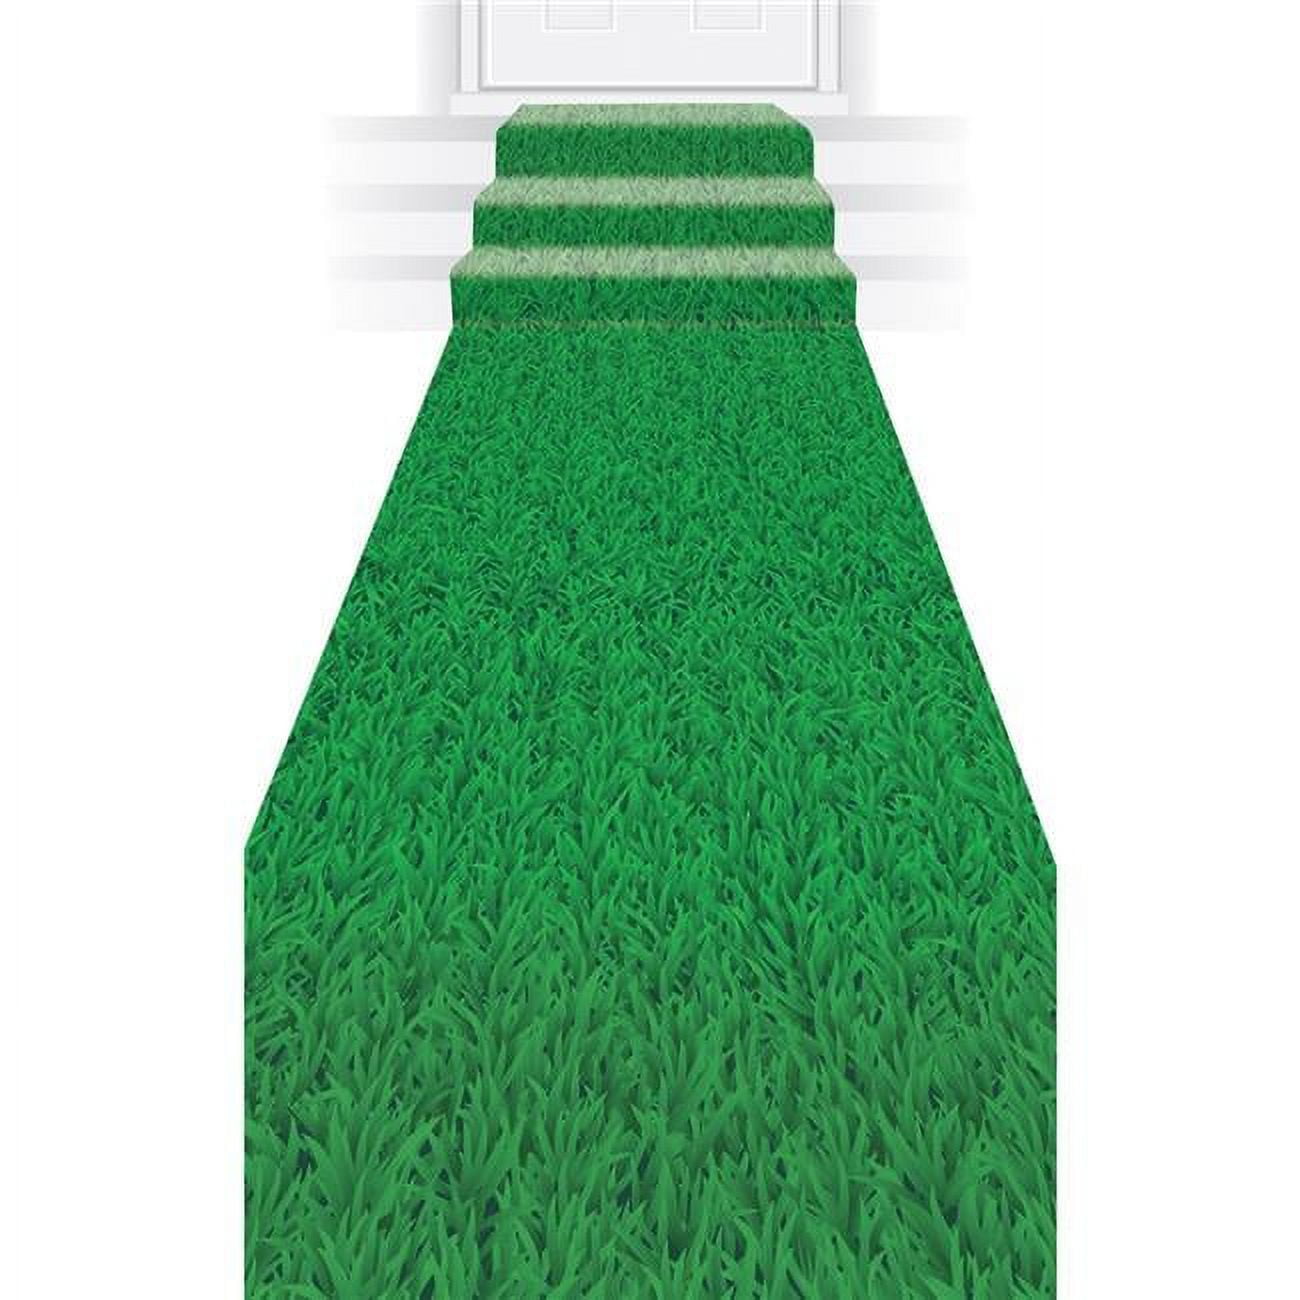 Picture of Beistle 53430 24 in. x 10 ft. Grass Runner - Pack of 6